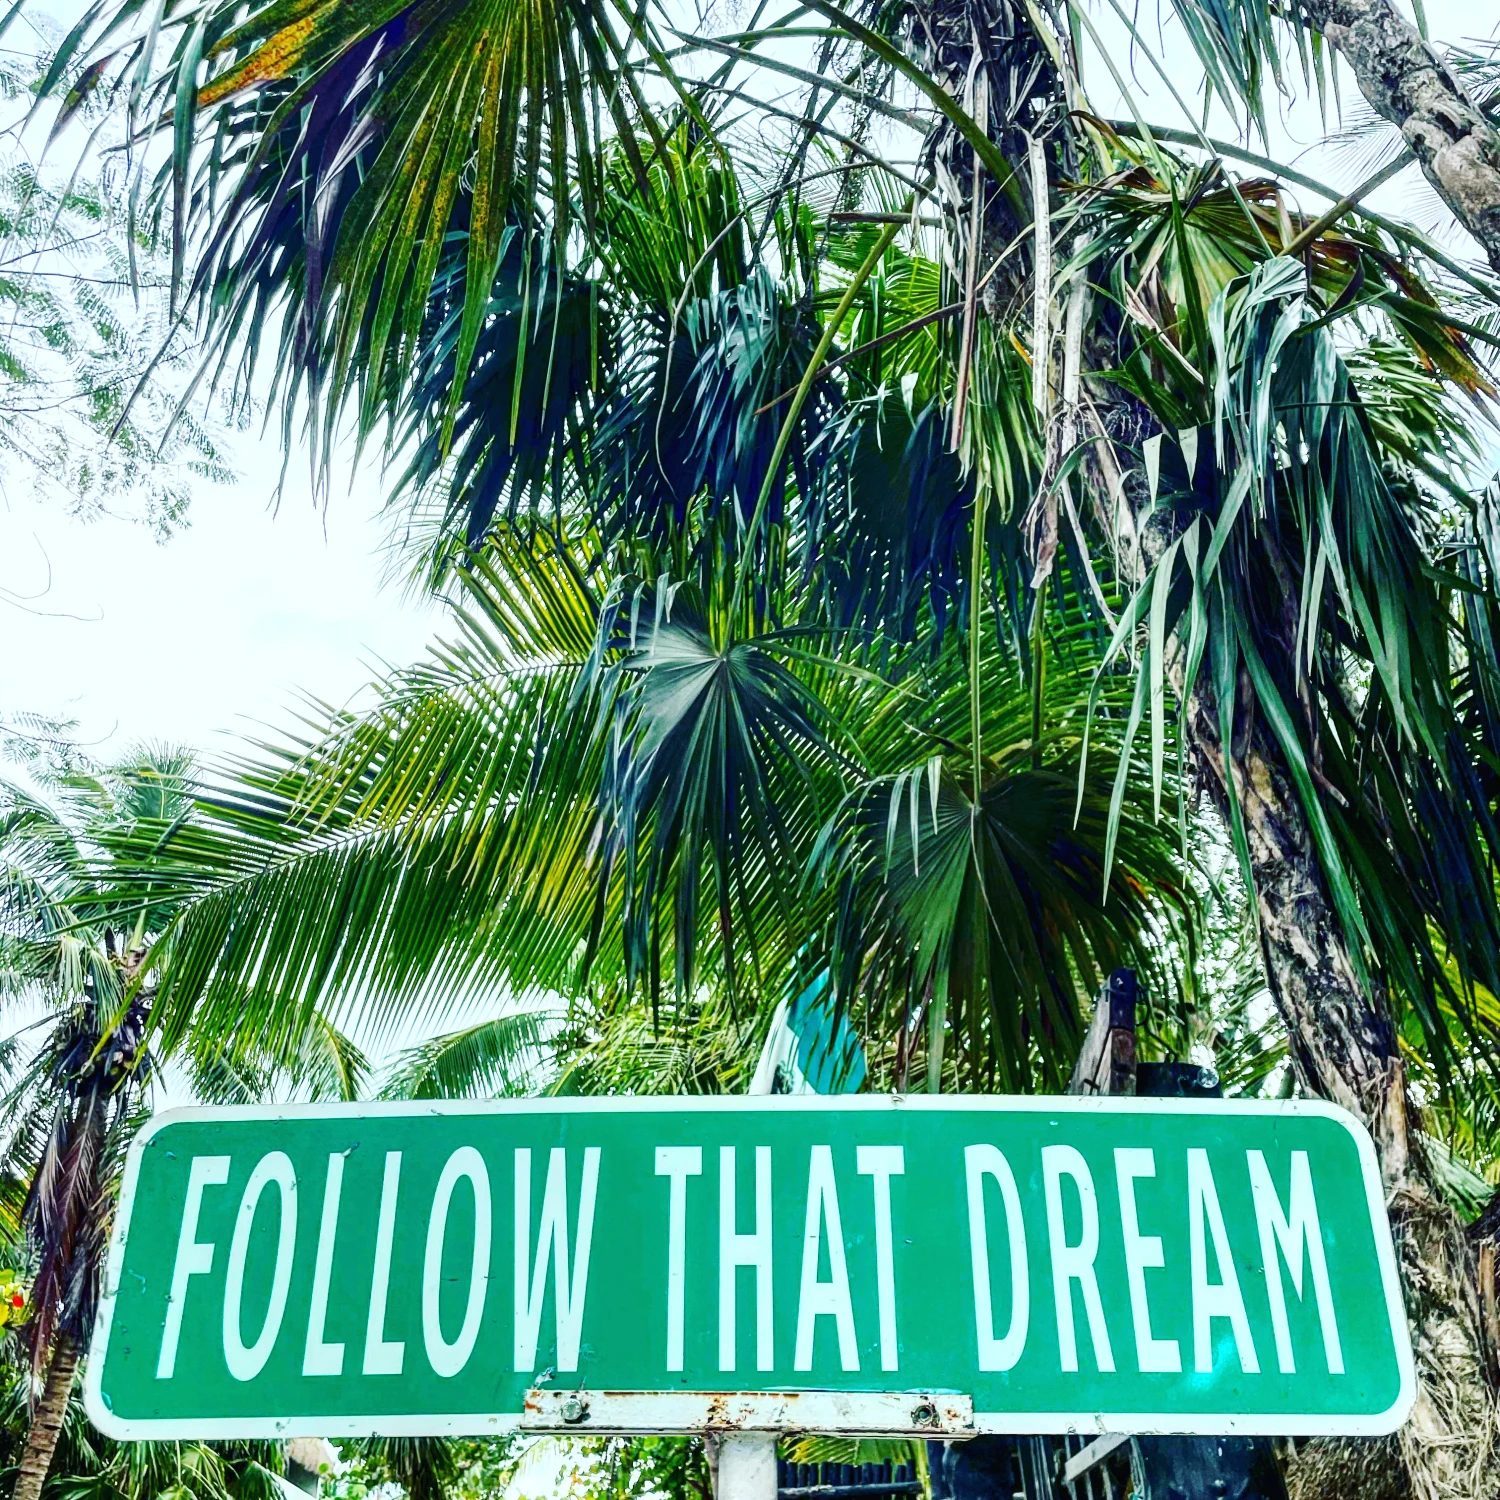 The sign to follow your dream to travel.